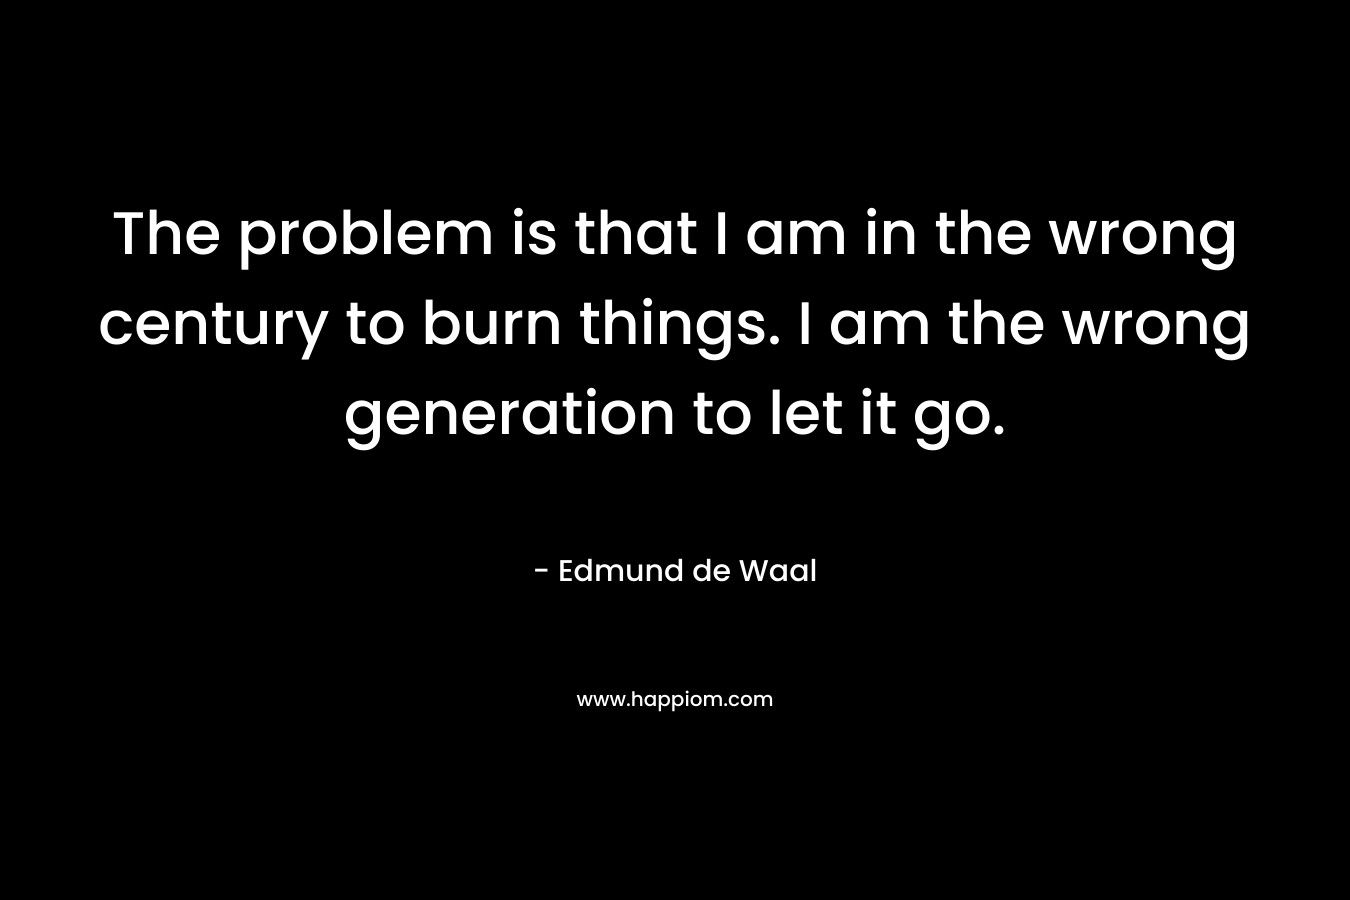 The problem is that I am in the wrong century to burn things. I am the wrong generation to let it go. – Edmund de Waal